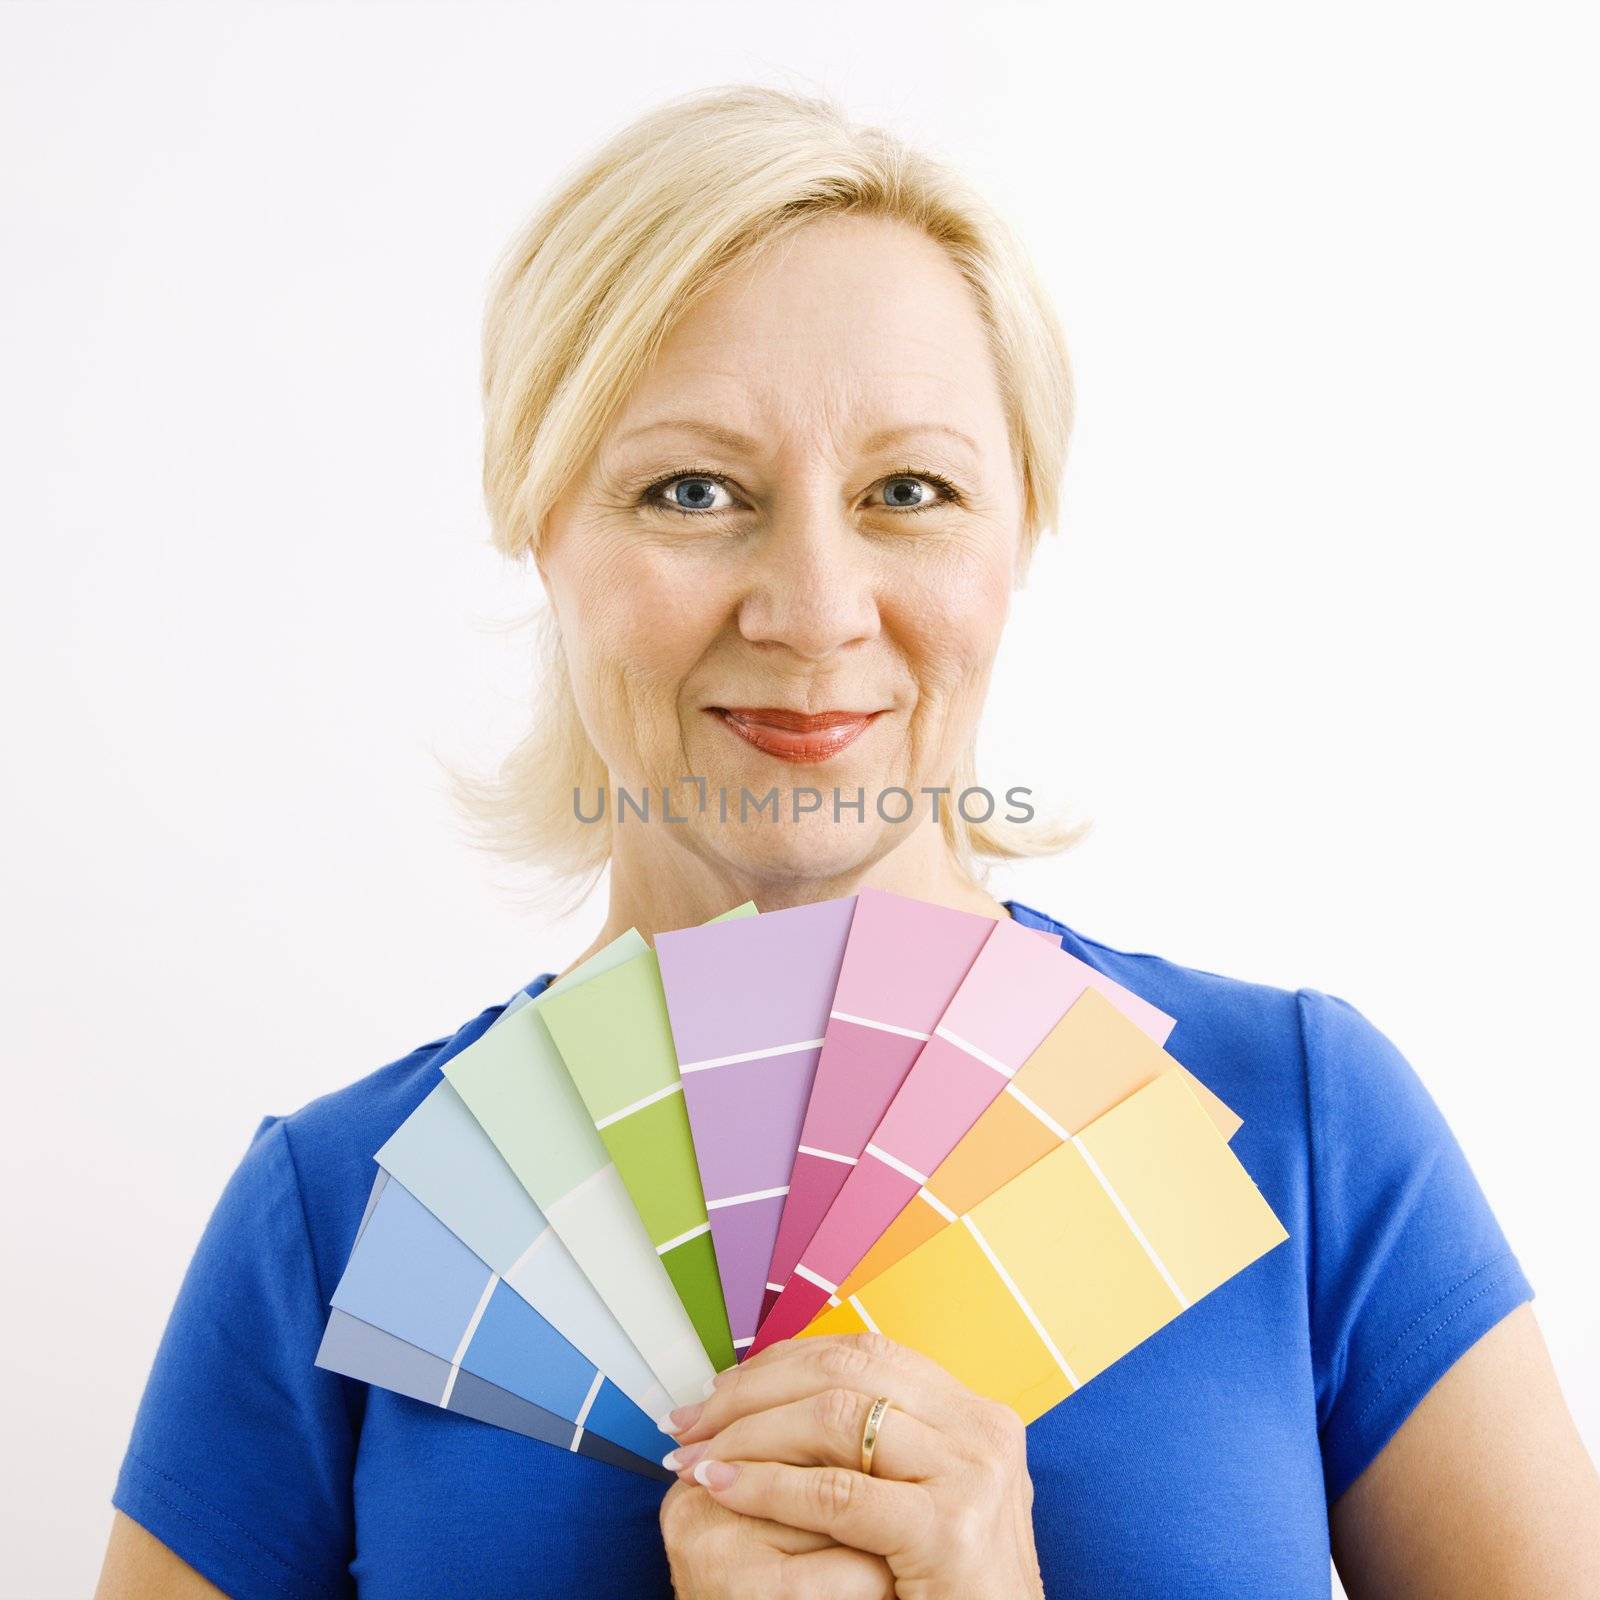 Portrait of smiling adult blonde woman holding paint swatches.